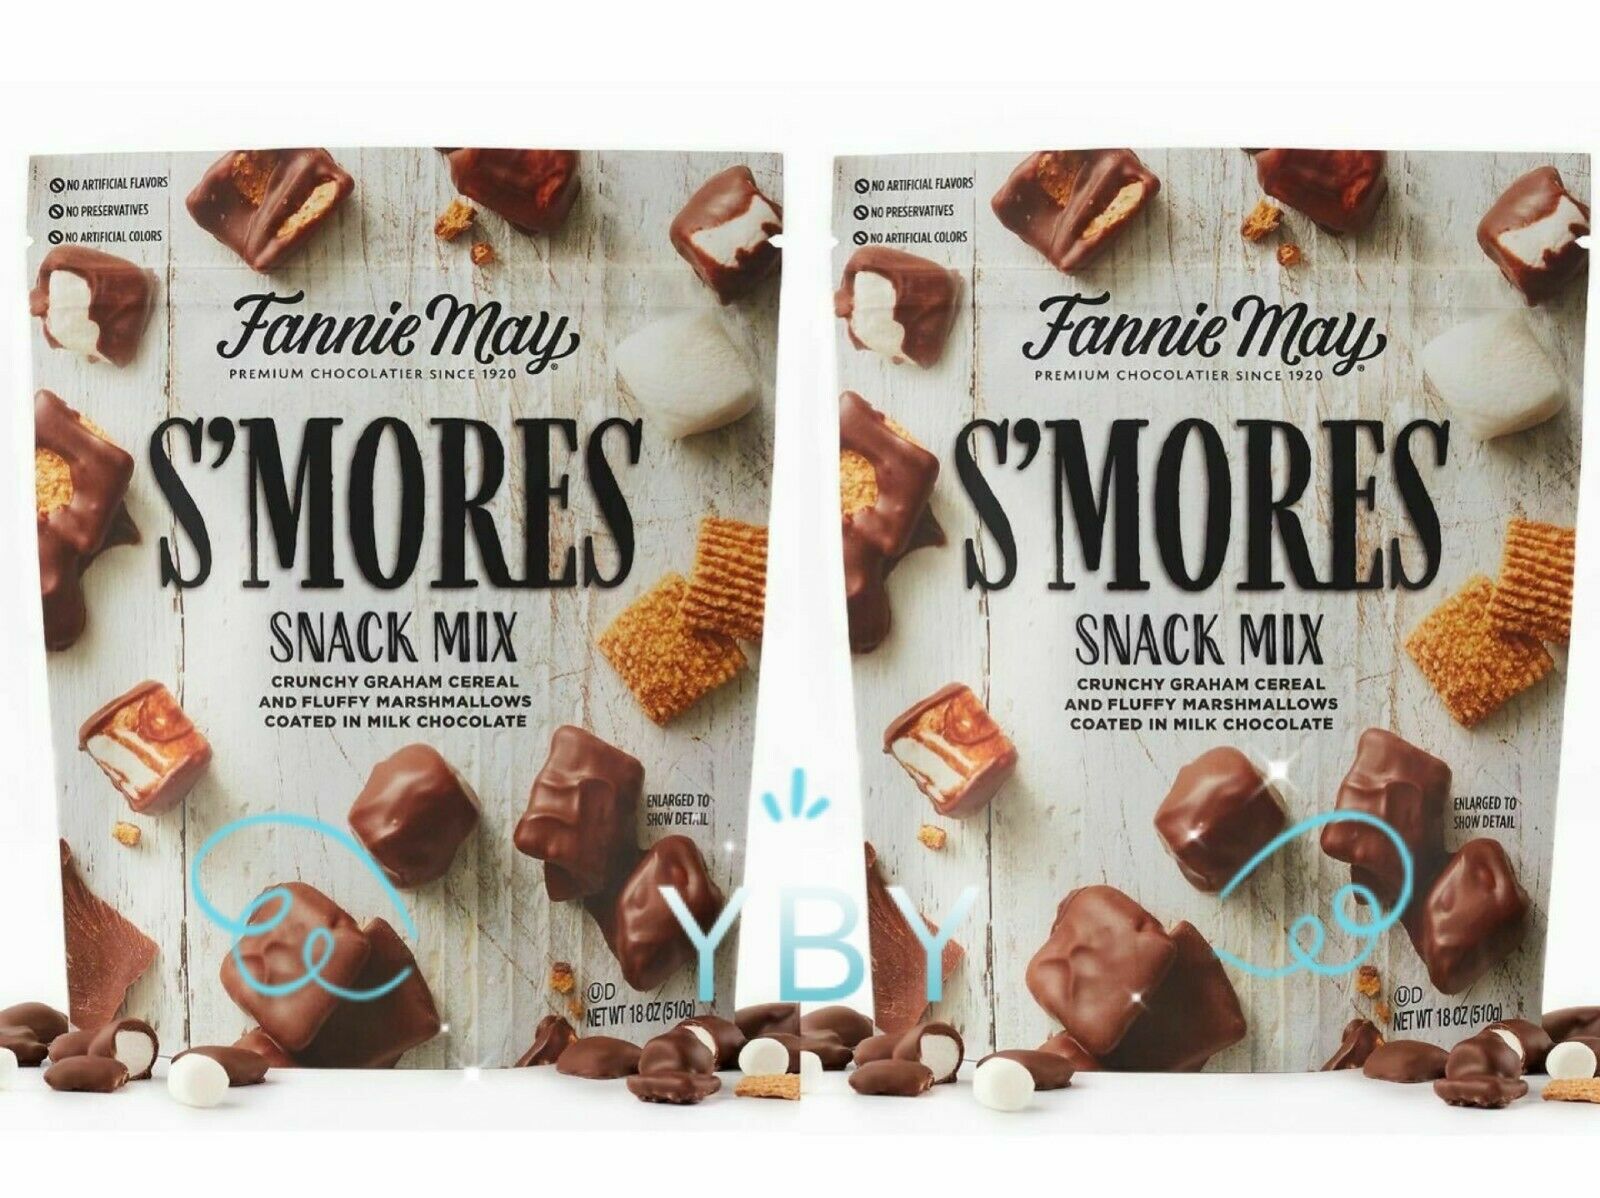 2 Packs Fannie May Milk Chocolate S'Mores Snack Mix 18 oz Each Pack